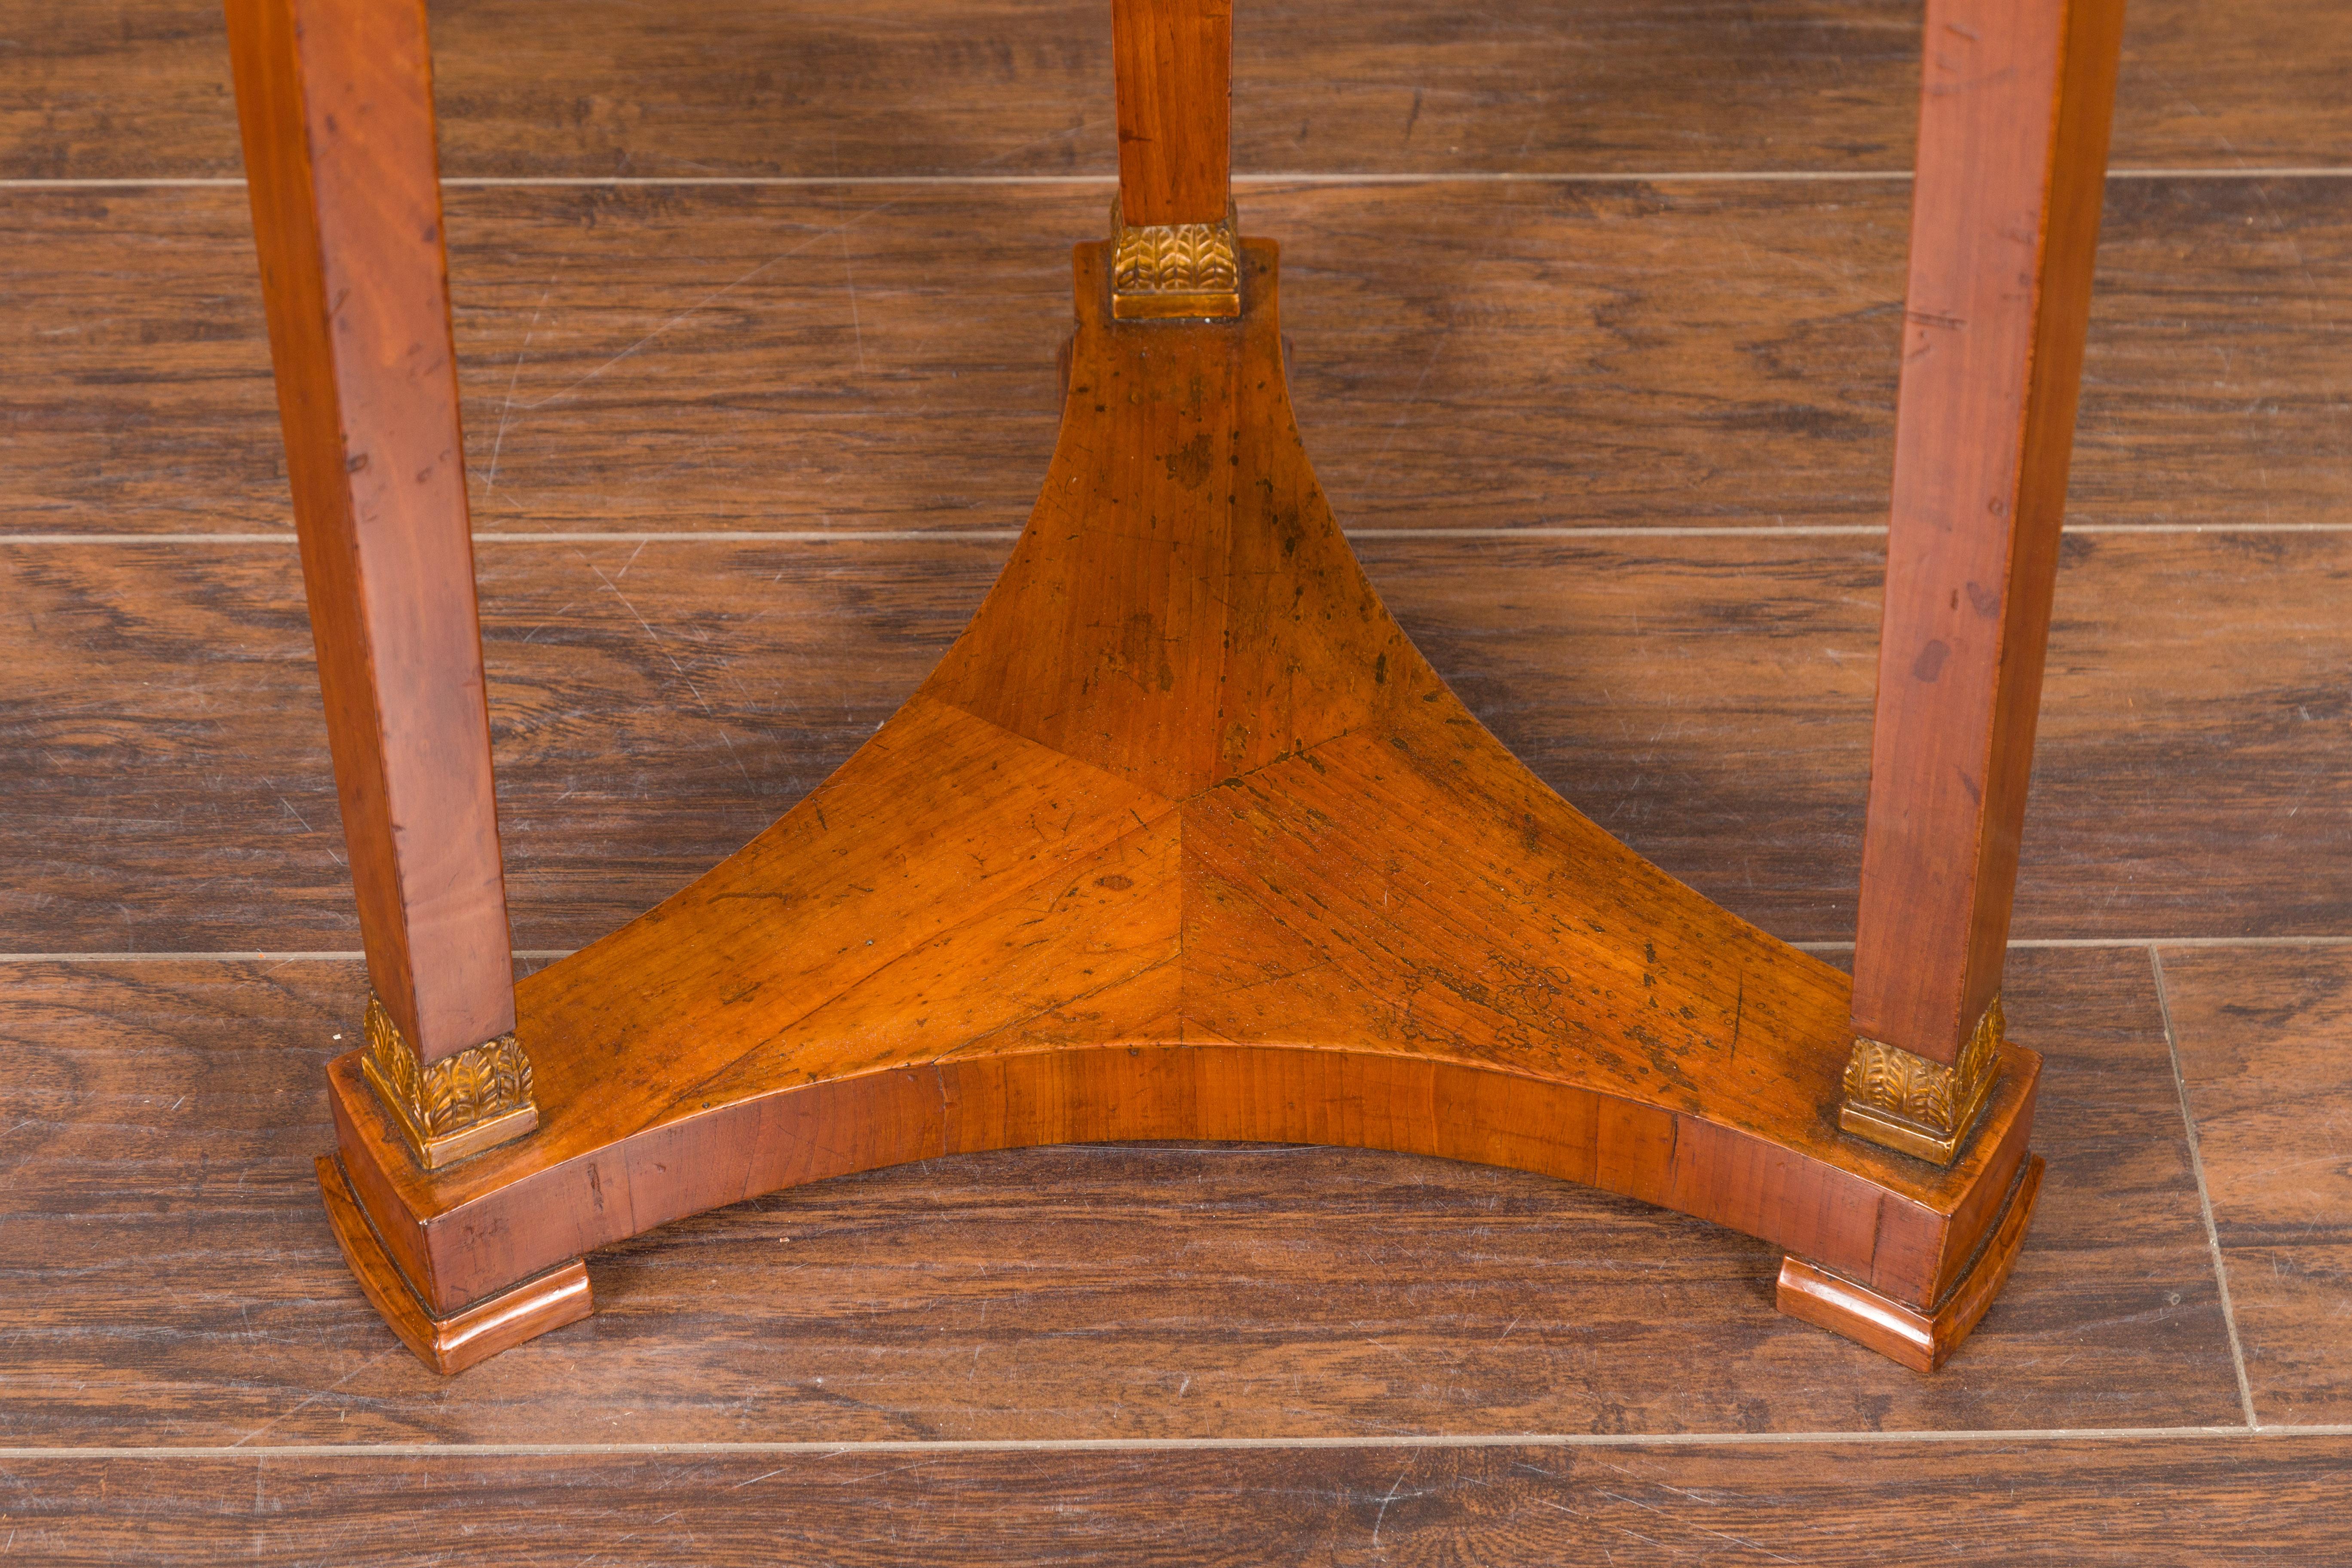 Austrian 1840s Biedermeier Walnut Tripod Table with Gilt and Carved Foliage In Good Condition For Sale In Atlanta, GA